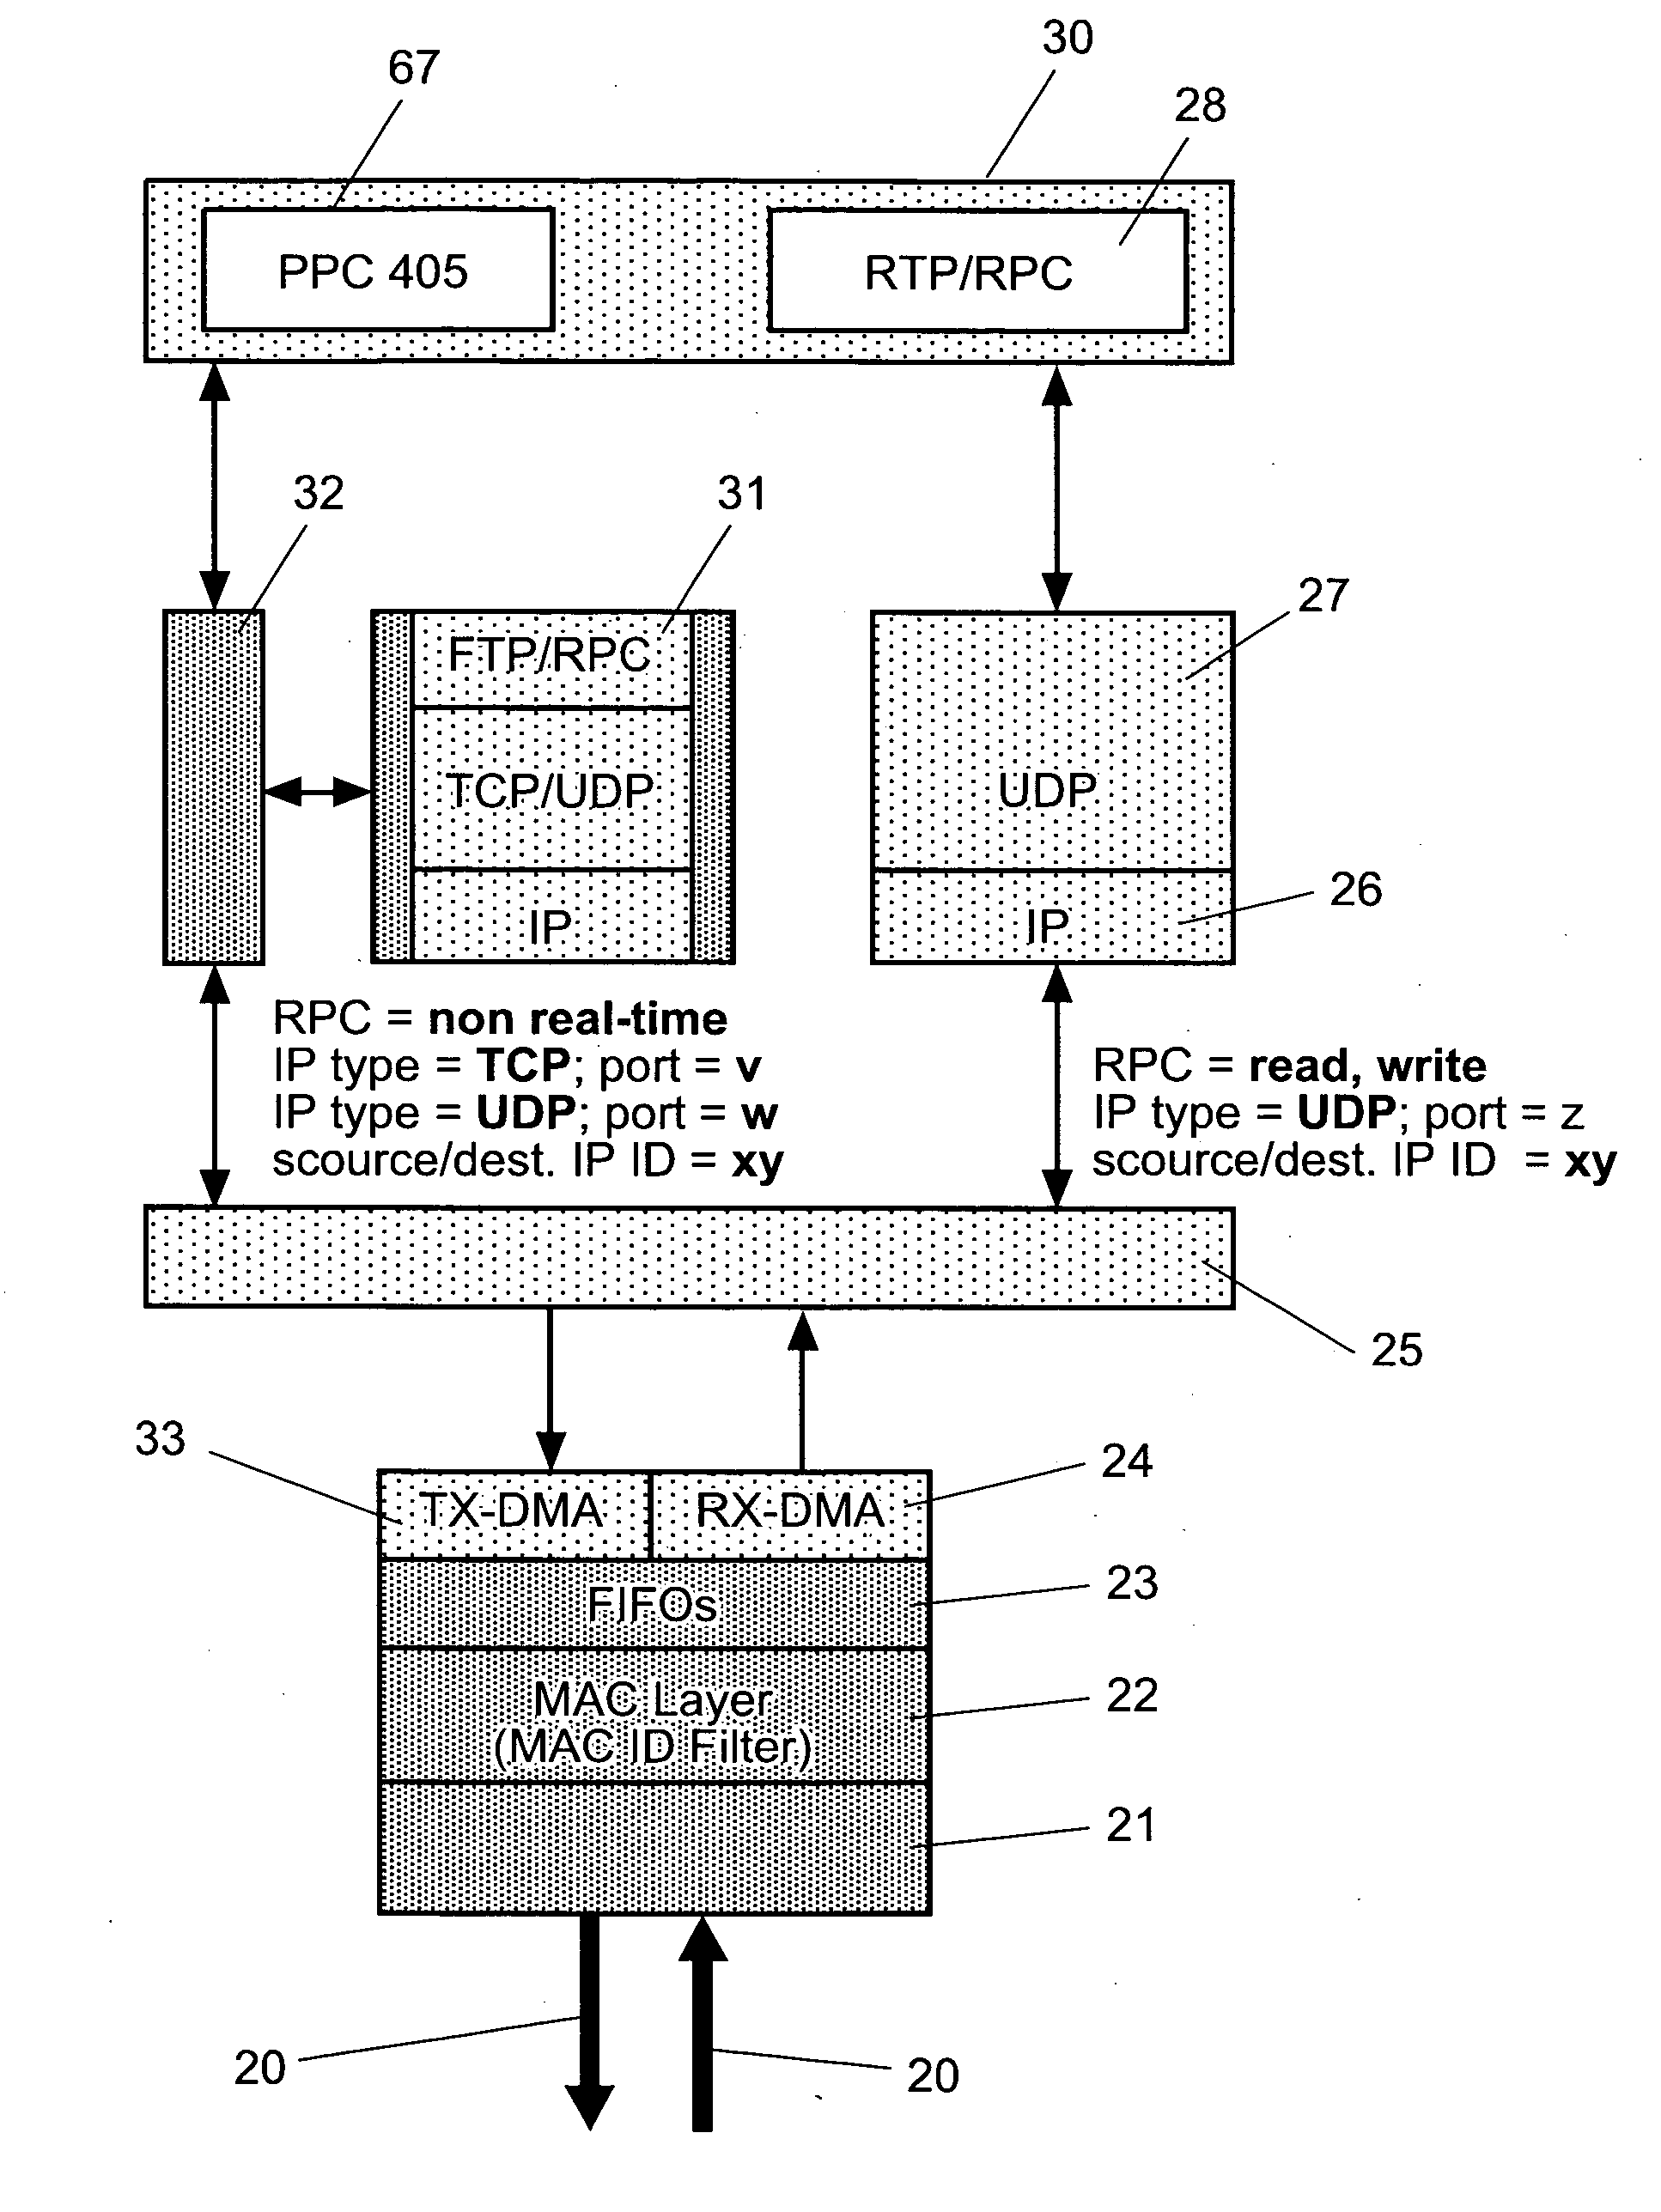 Method for performing data transport over a serial bus using Internet Protocol and apparatus for use in the method